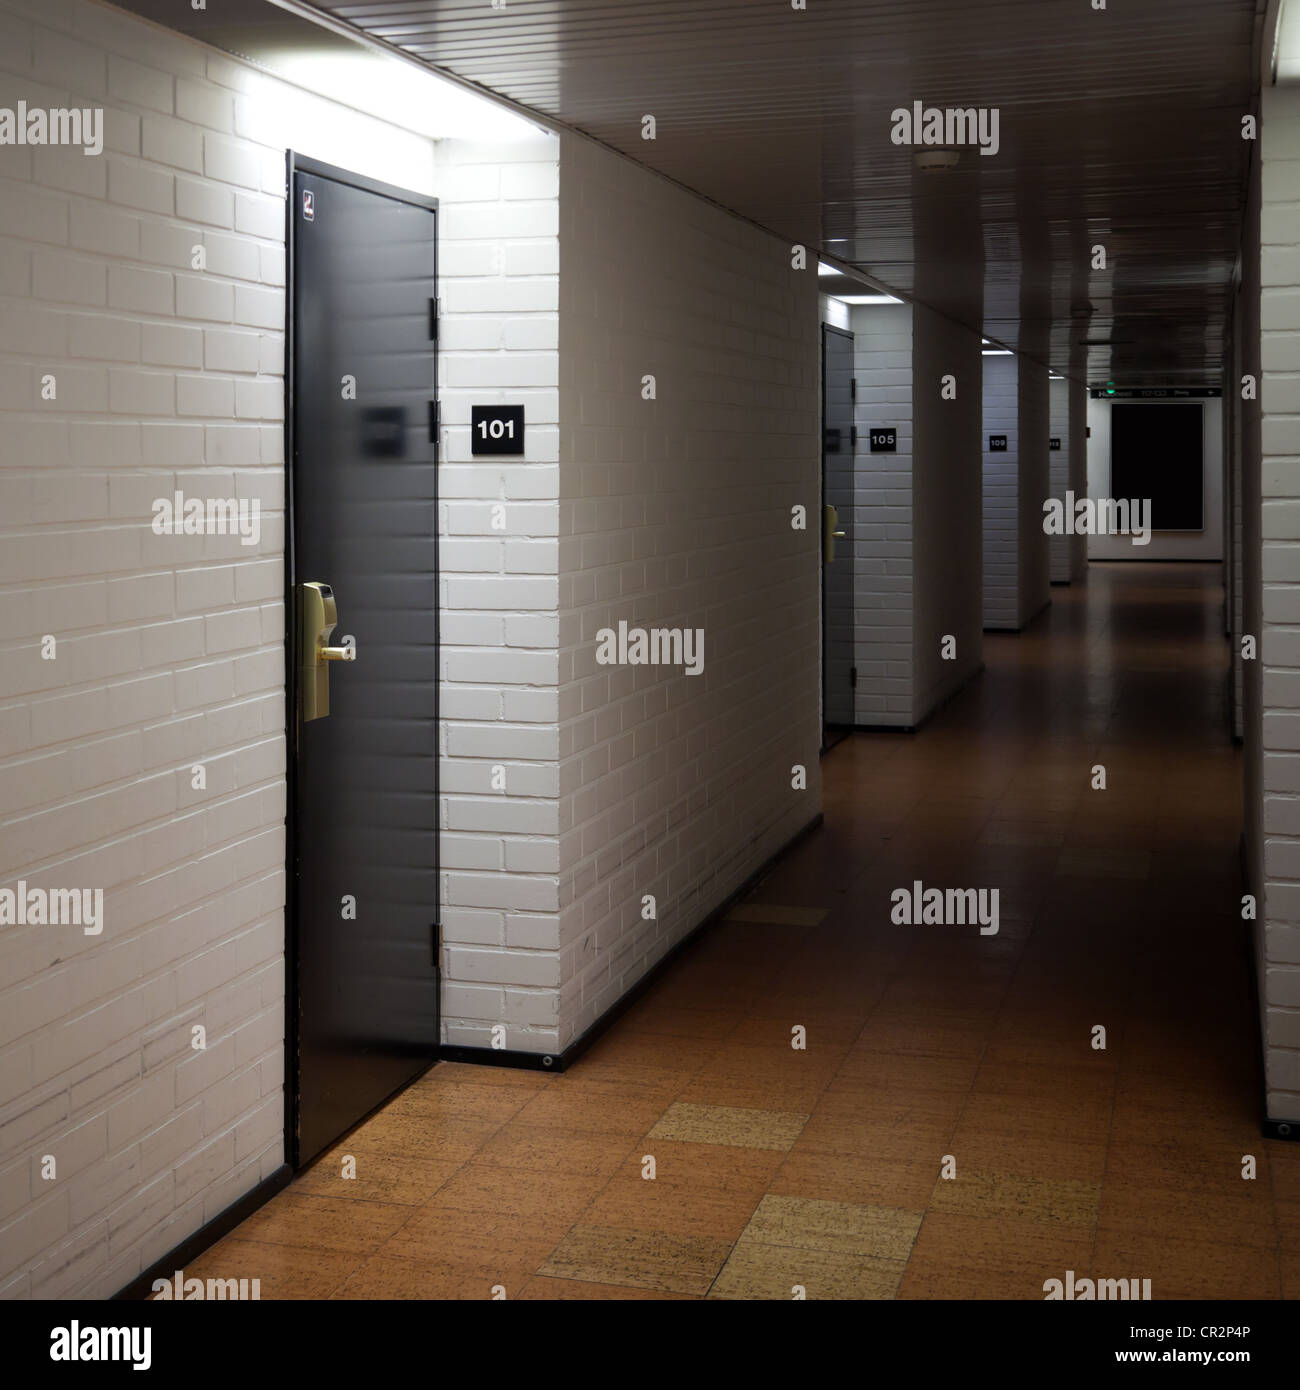 Abstract dark hotel corridor interior with doors and room numbers Stock Photo